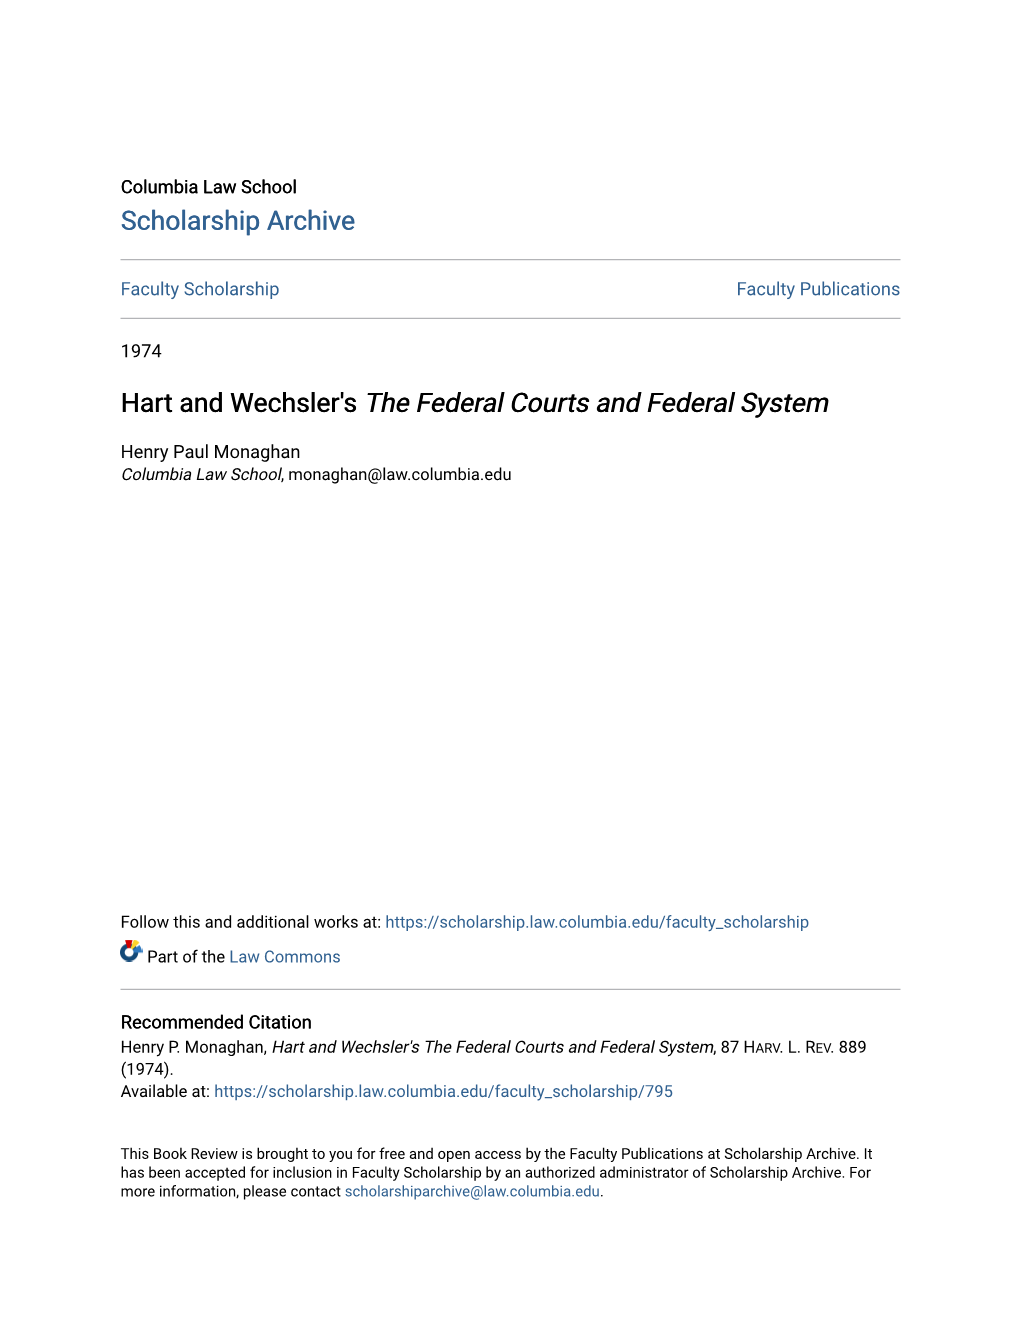 Hart and Wechsler's the Federal Courts and Federal System